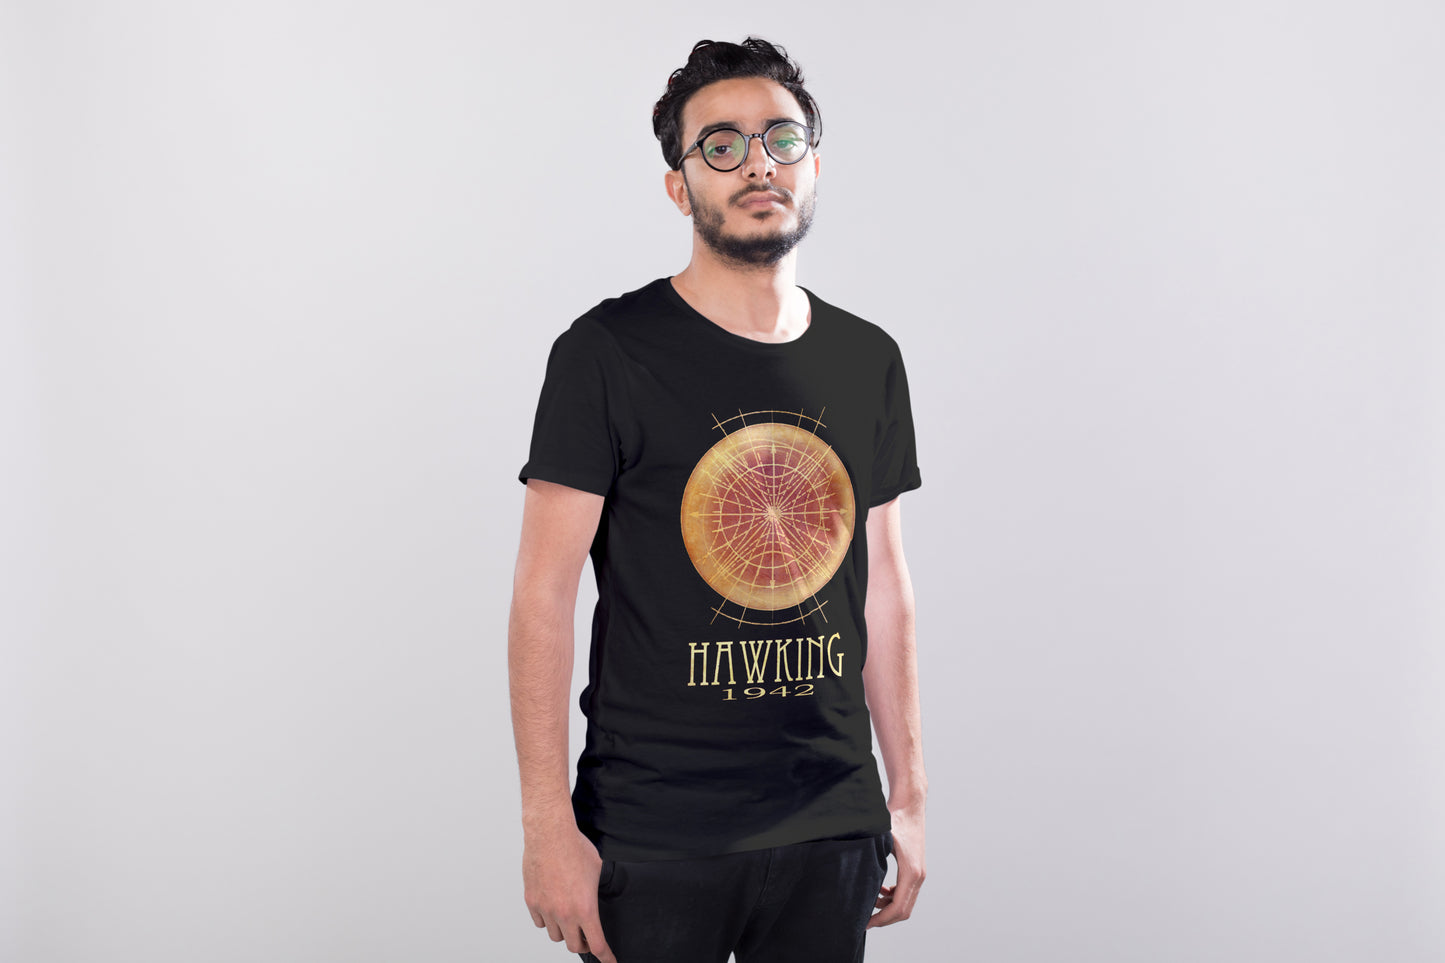 Hawking Radiation Astronomy T-shirt, Stephen Hawking Space and Physics T-shirt